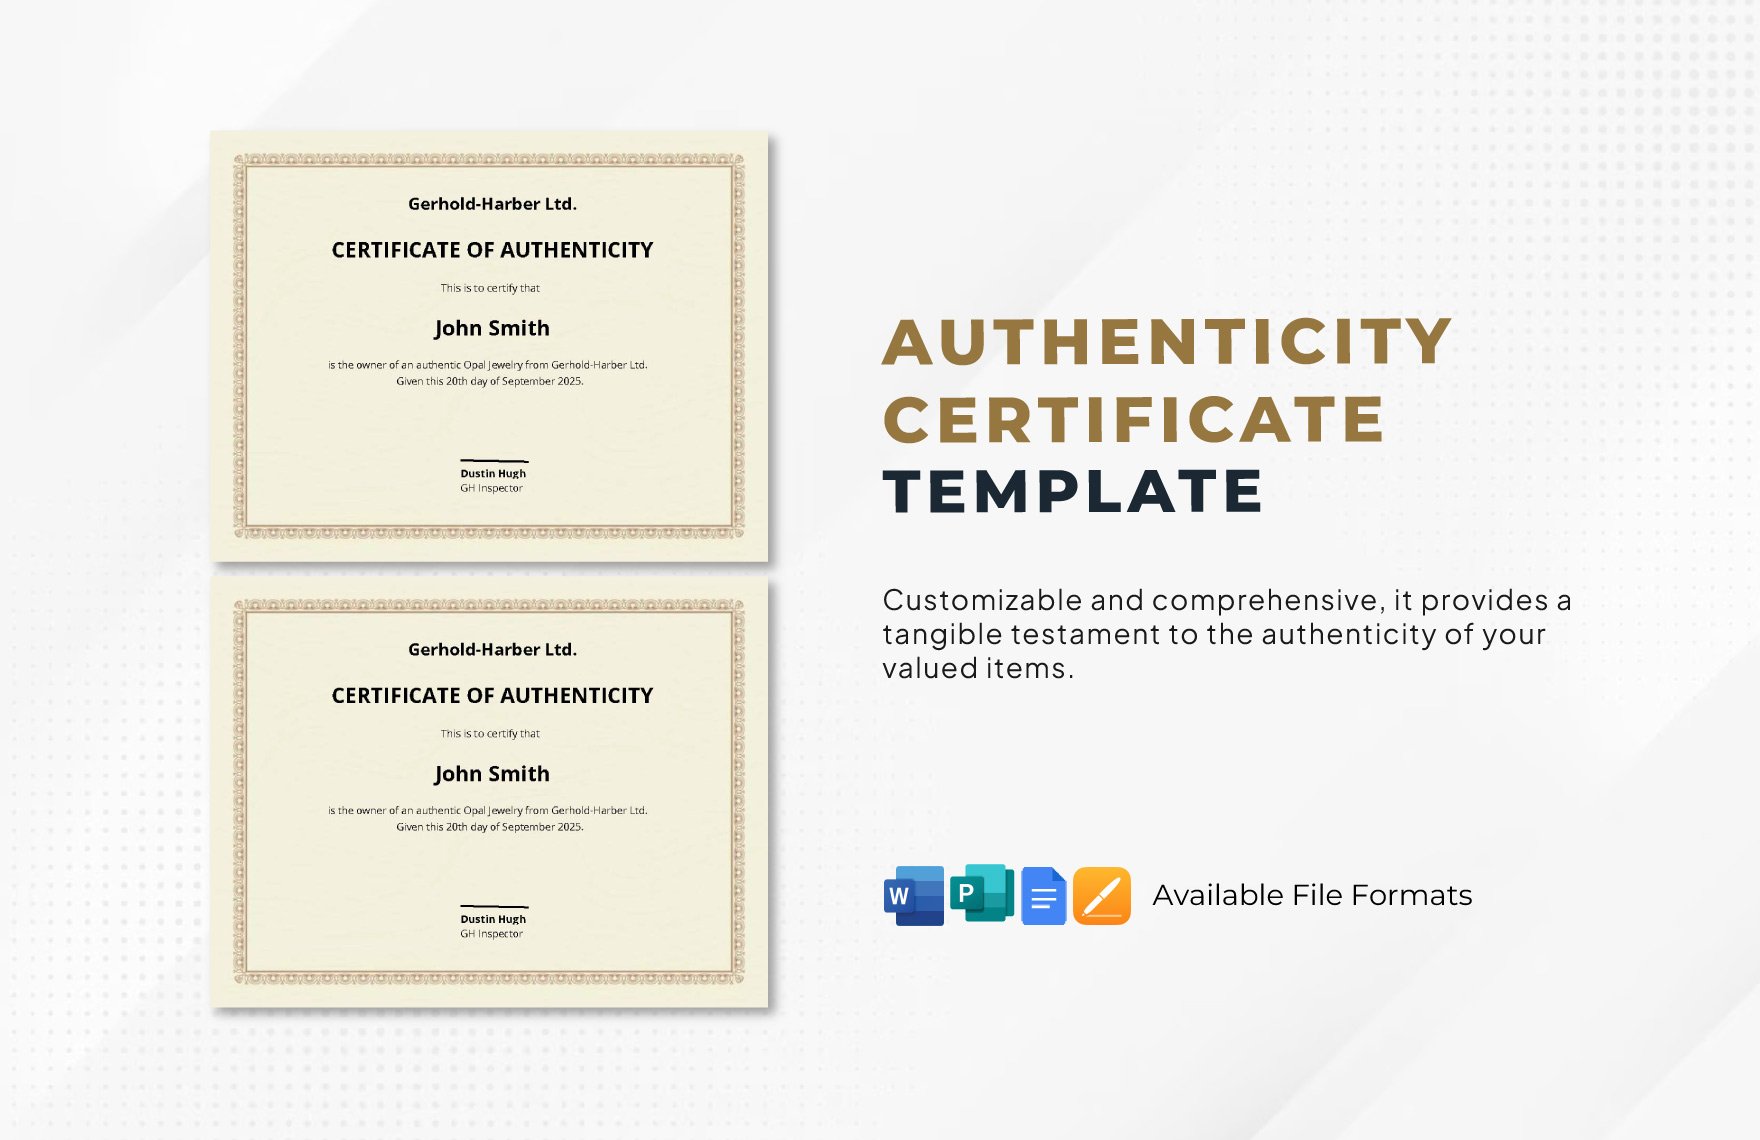 Authenticity Certificate Template in Word, Google Docs, Illustrator, PSD, Apple Pages, Publisher